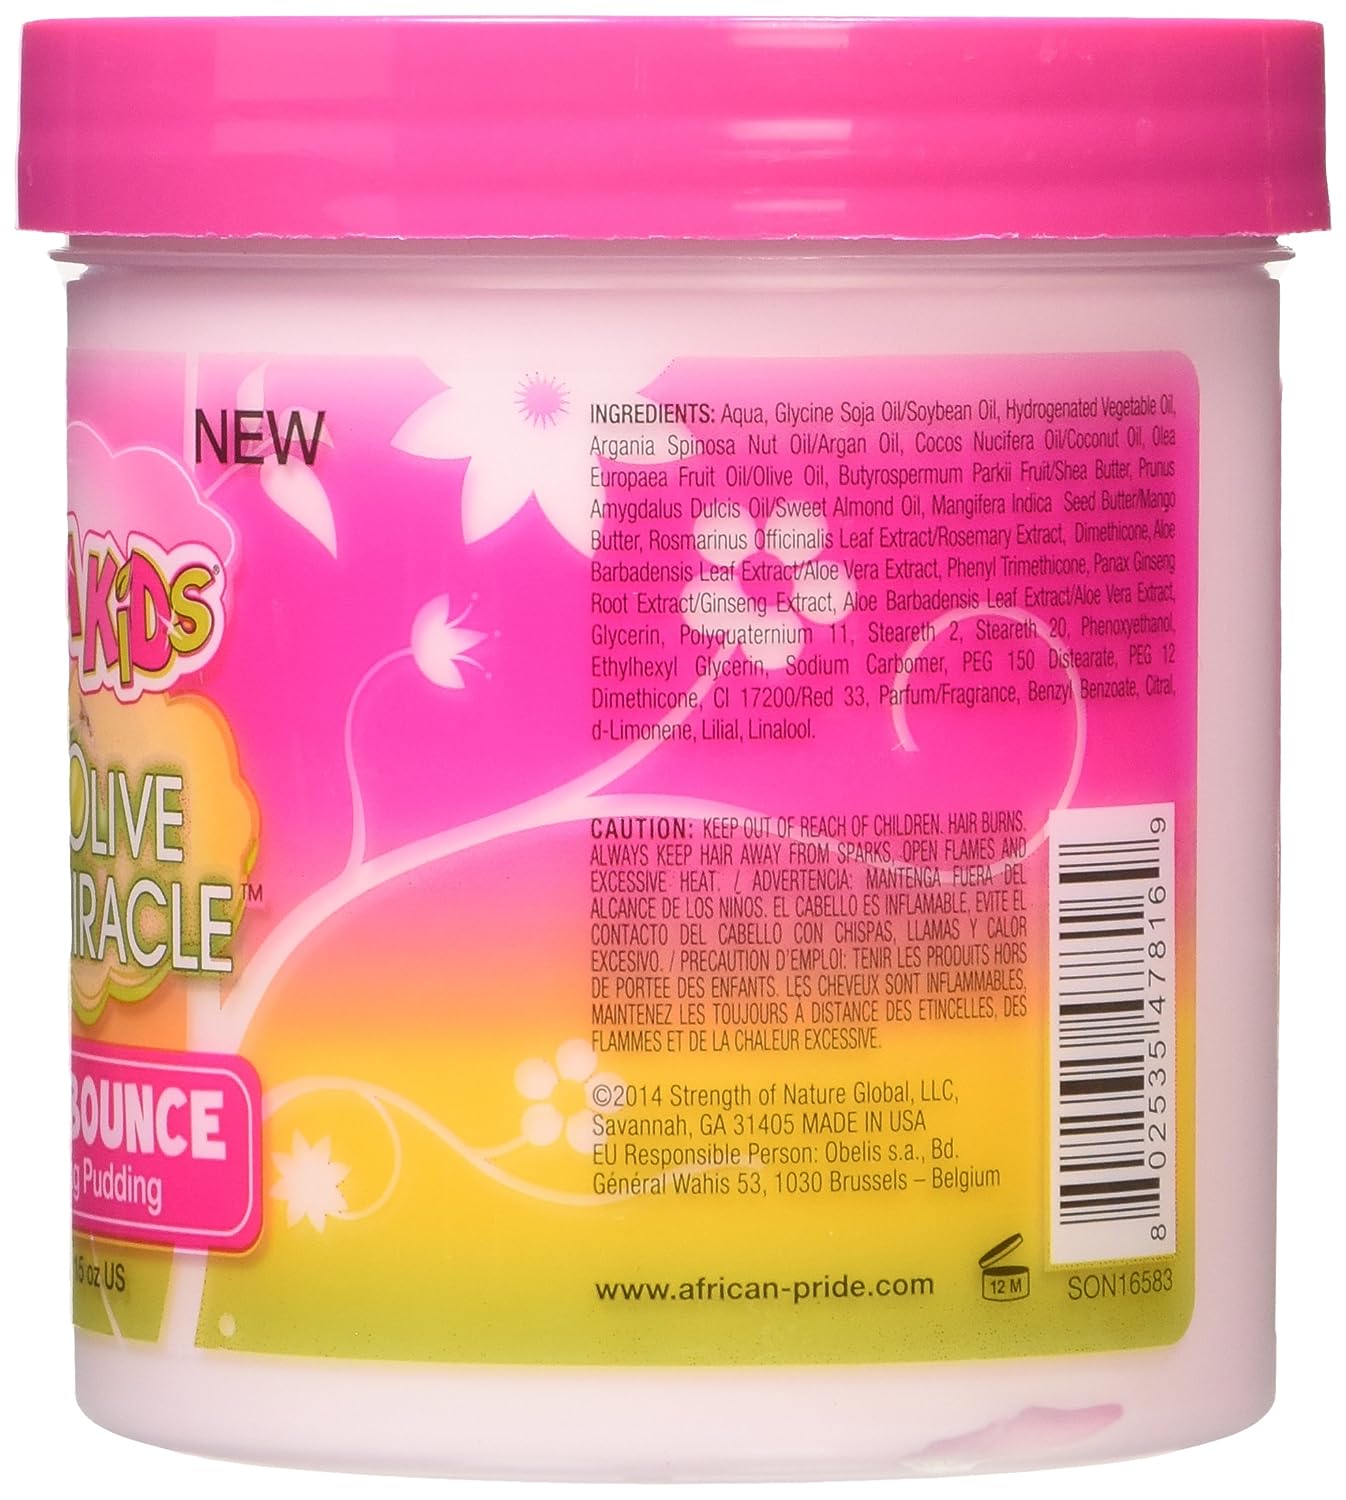 African Pride Dream Kids Quick Bounce Detangling Pudding 15oz